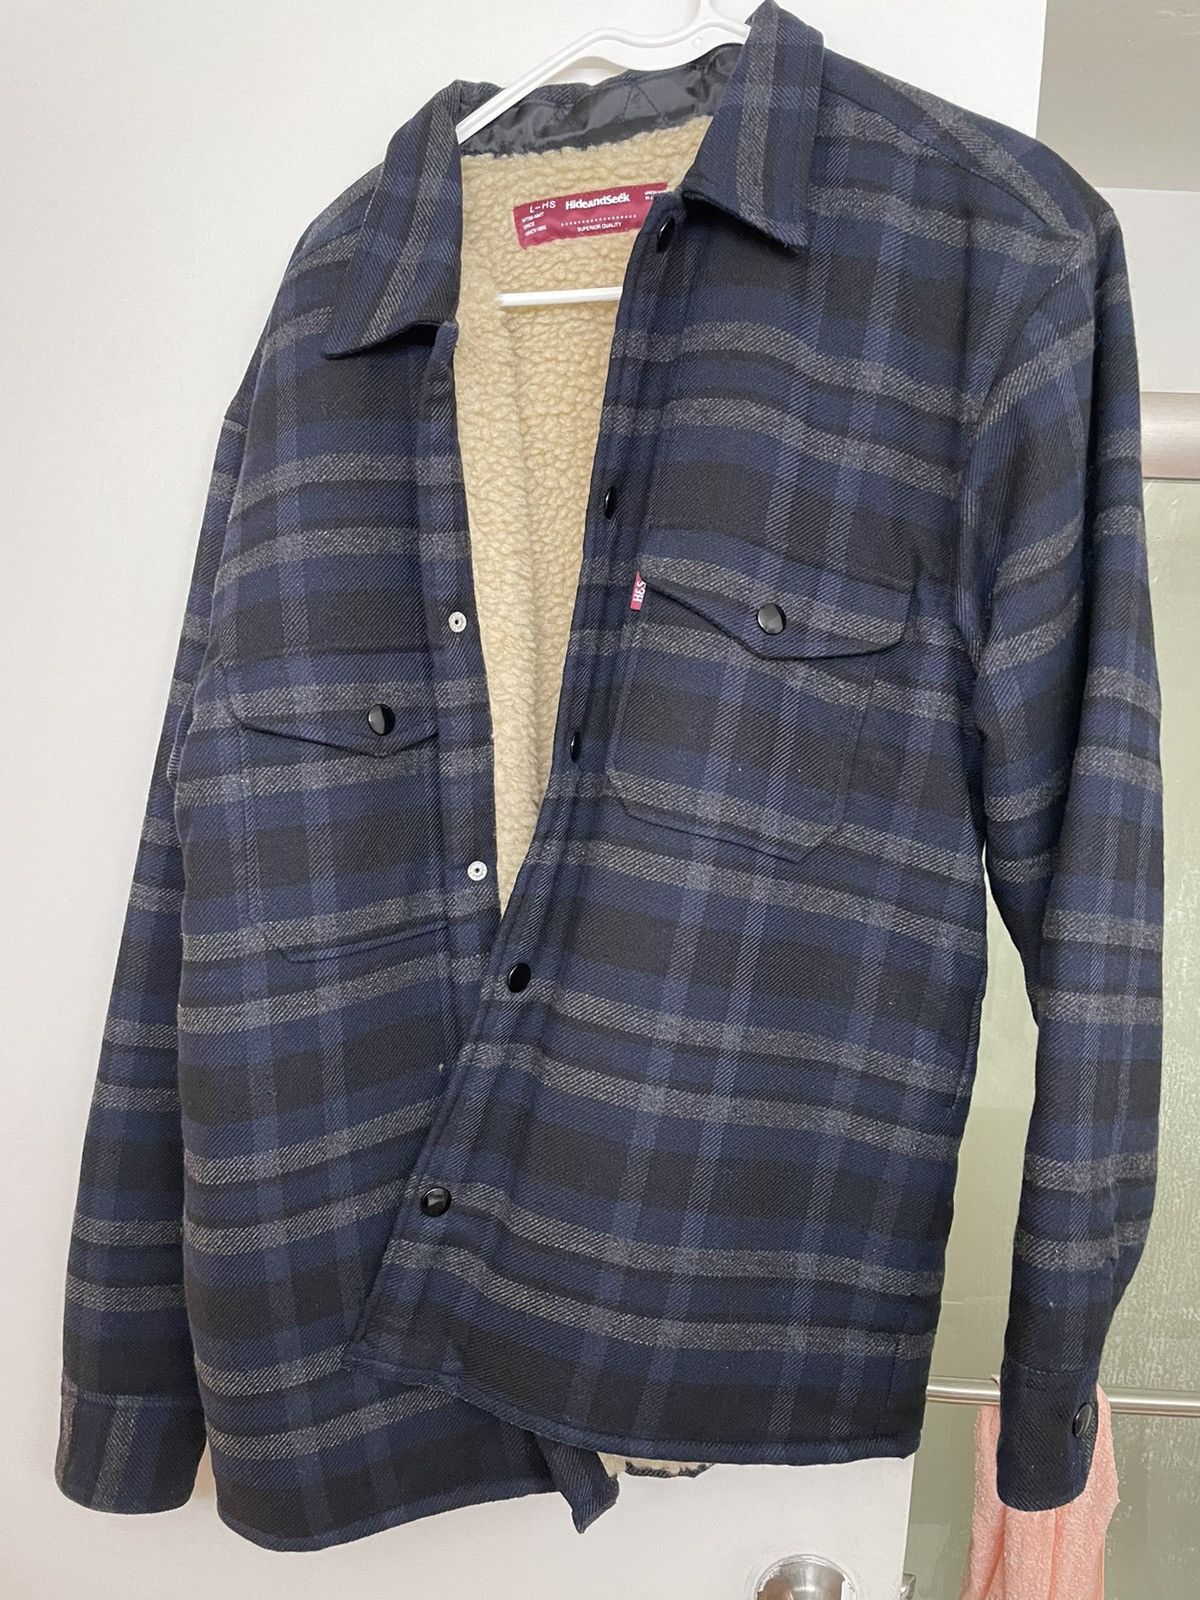 HIDE AND SEEK CPO WOOL SHIRT - buyfromhill.com